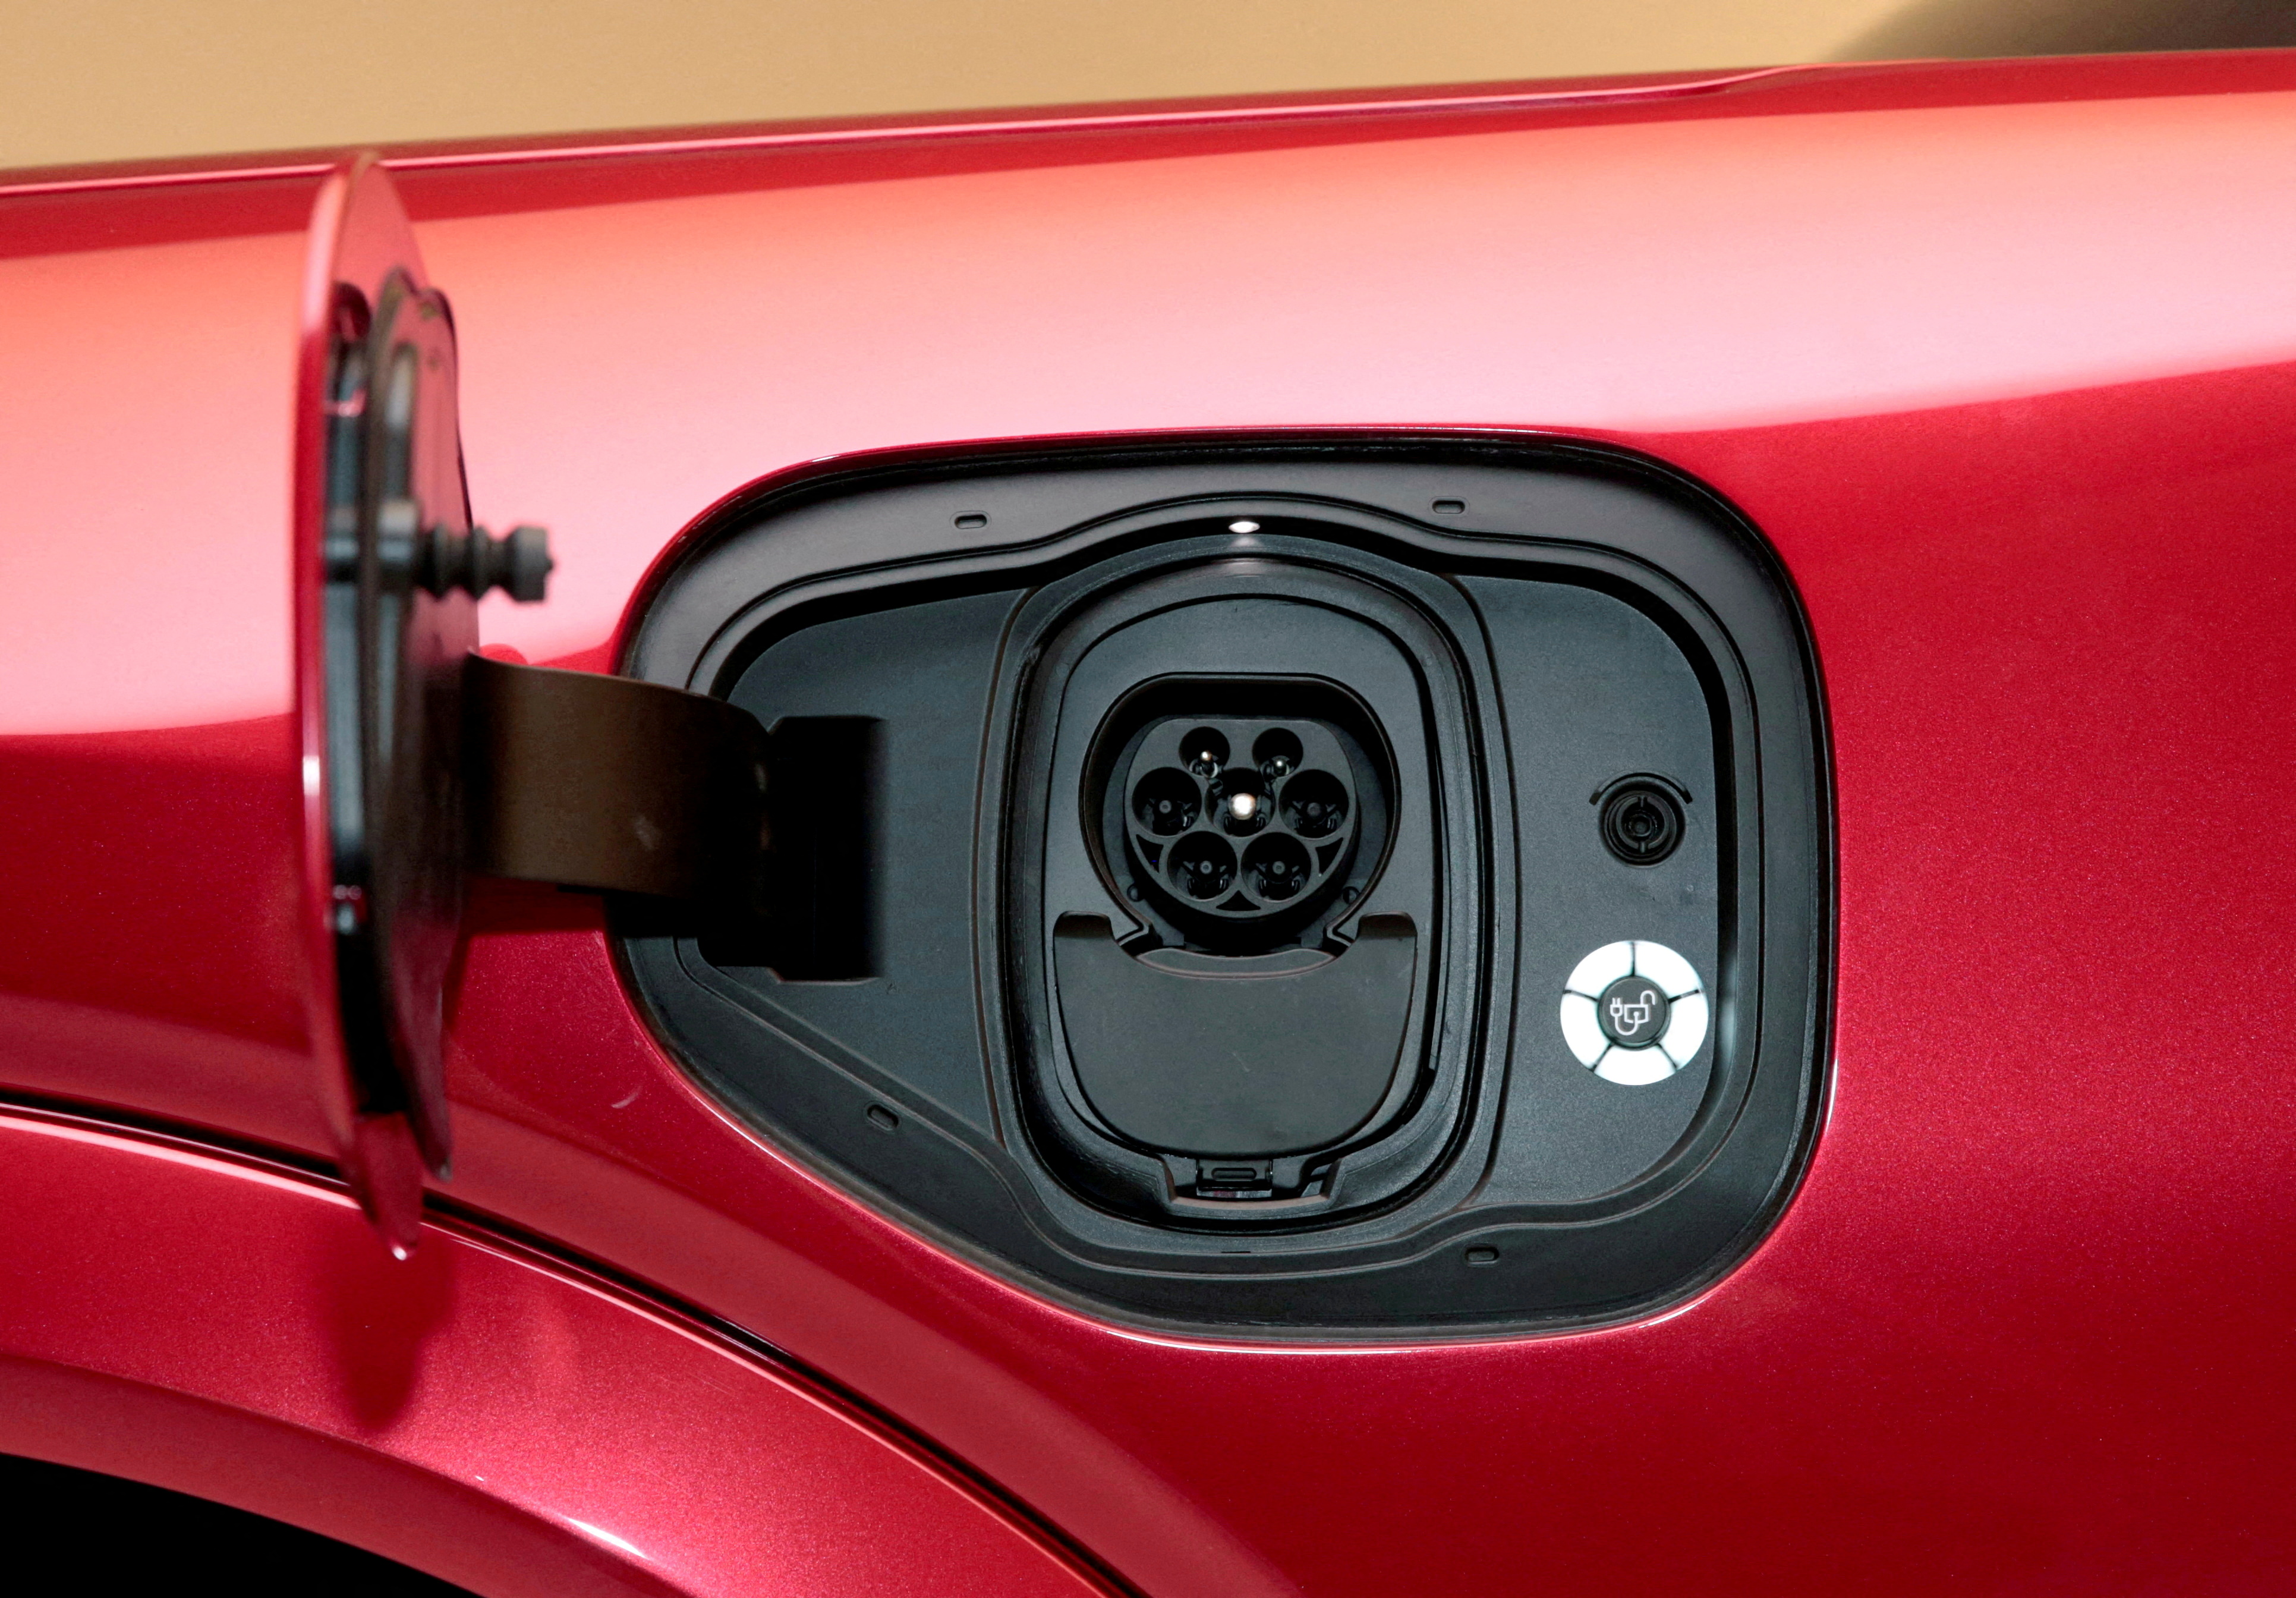 The charging socket is seen on Ford Motor Co's electric Mustang Mach-E vehicle during a photo shoot at a studio in Warren, Michigan